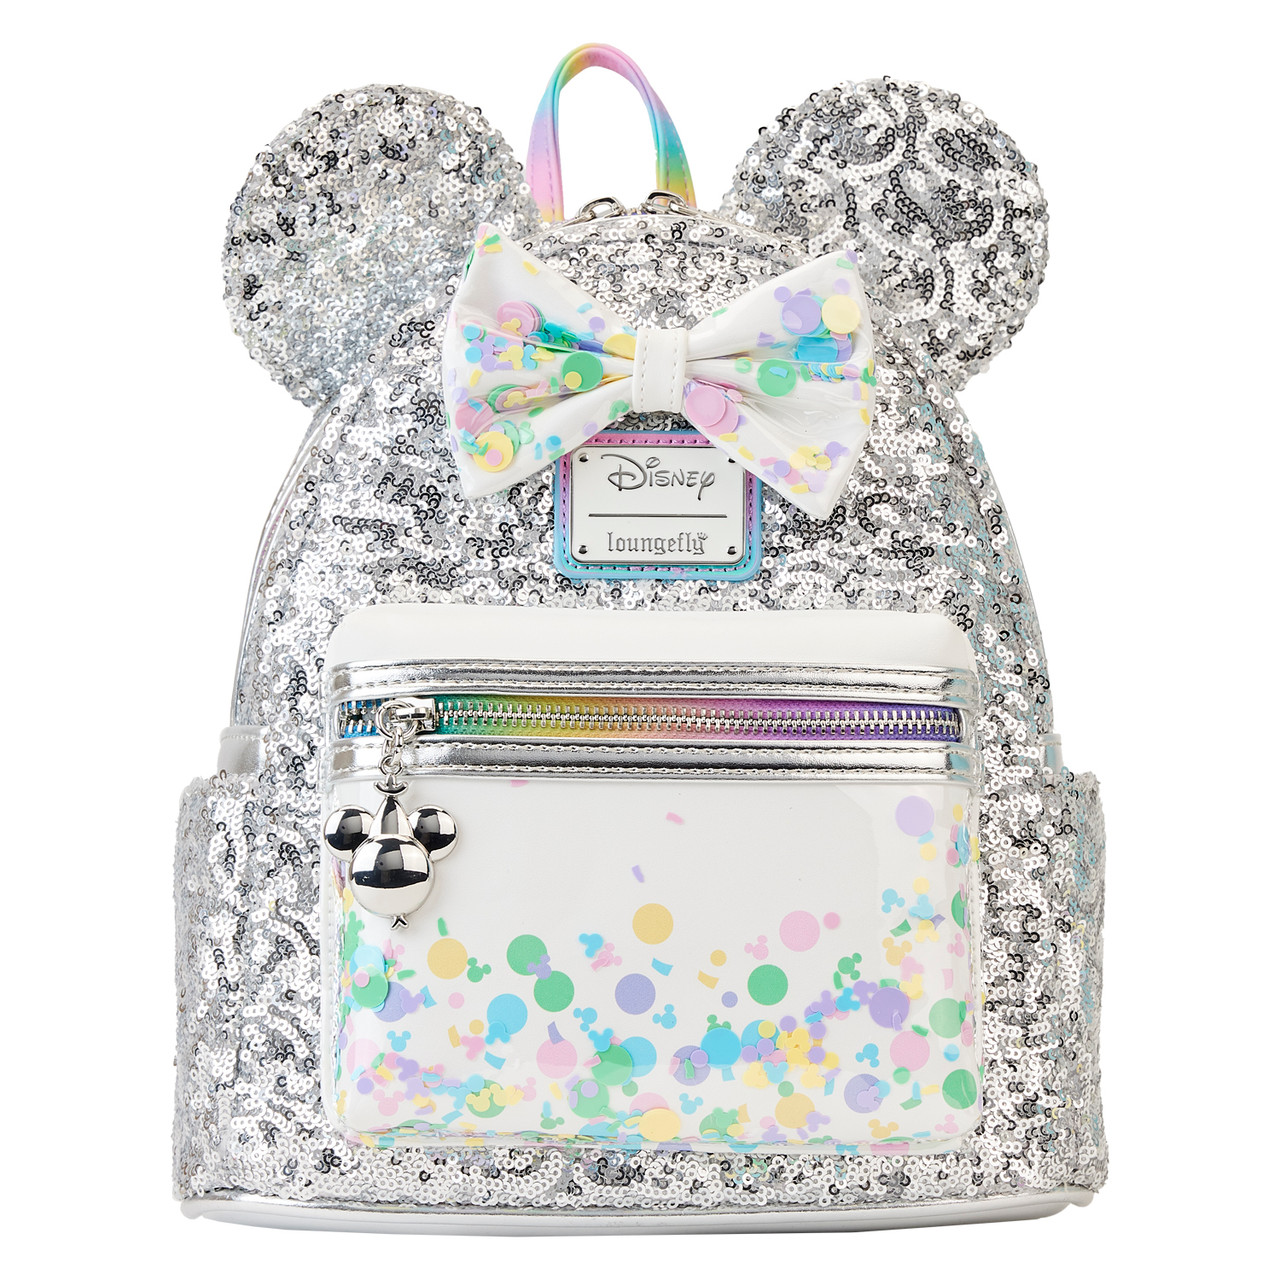 Loungefly x Disney Lasr Exclusive Minnie Mouse Dress Mini Backpack